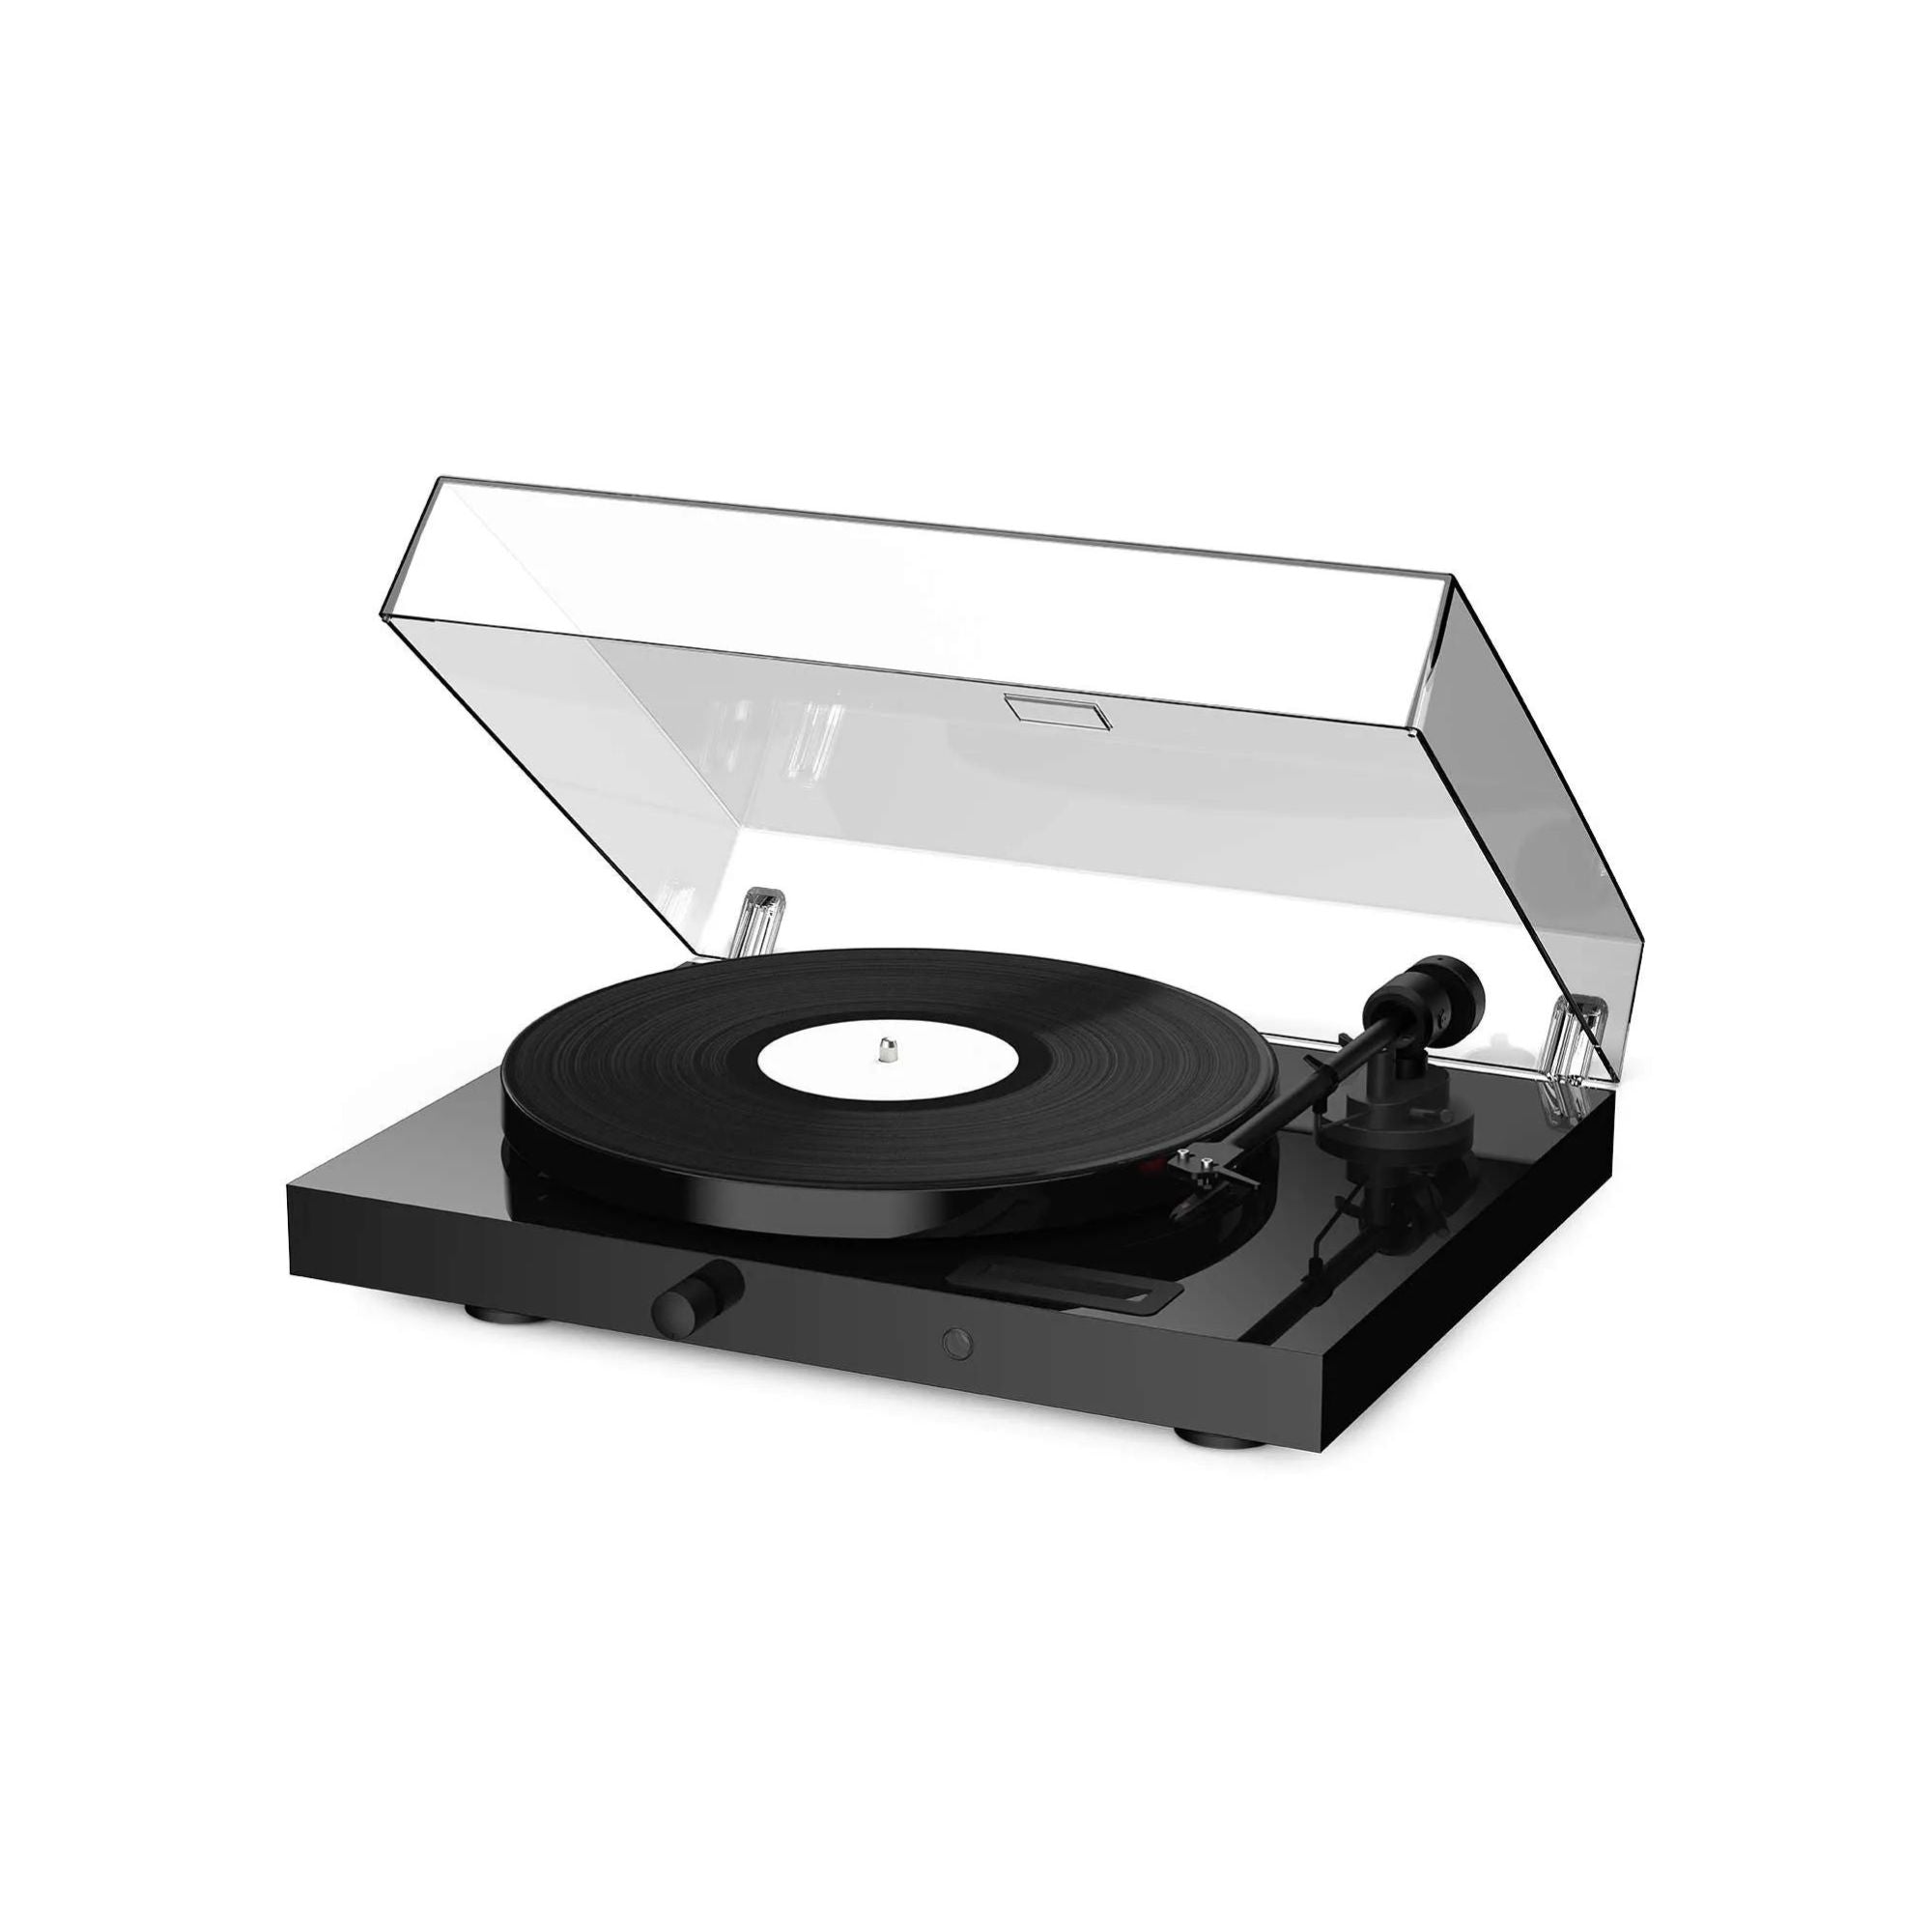 Pro-Ject Juke Box E1, Pro-Ject Audio Systems, Turntable - AVStore.in